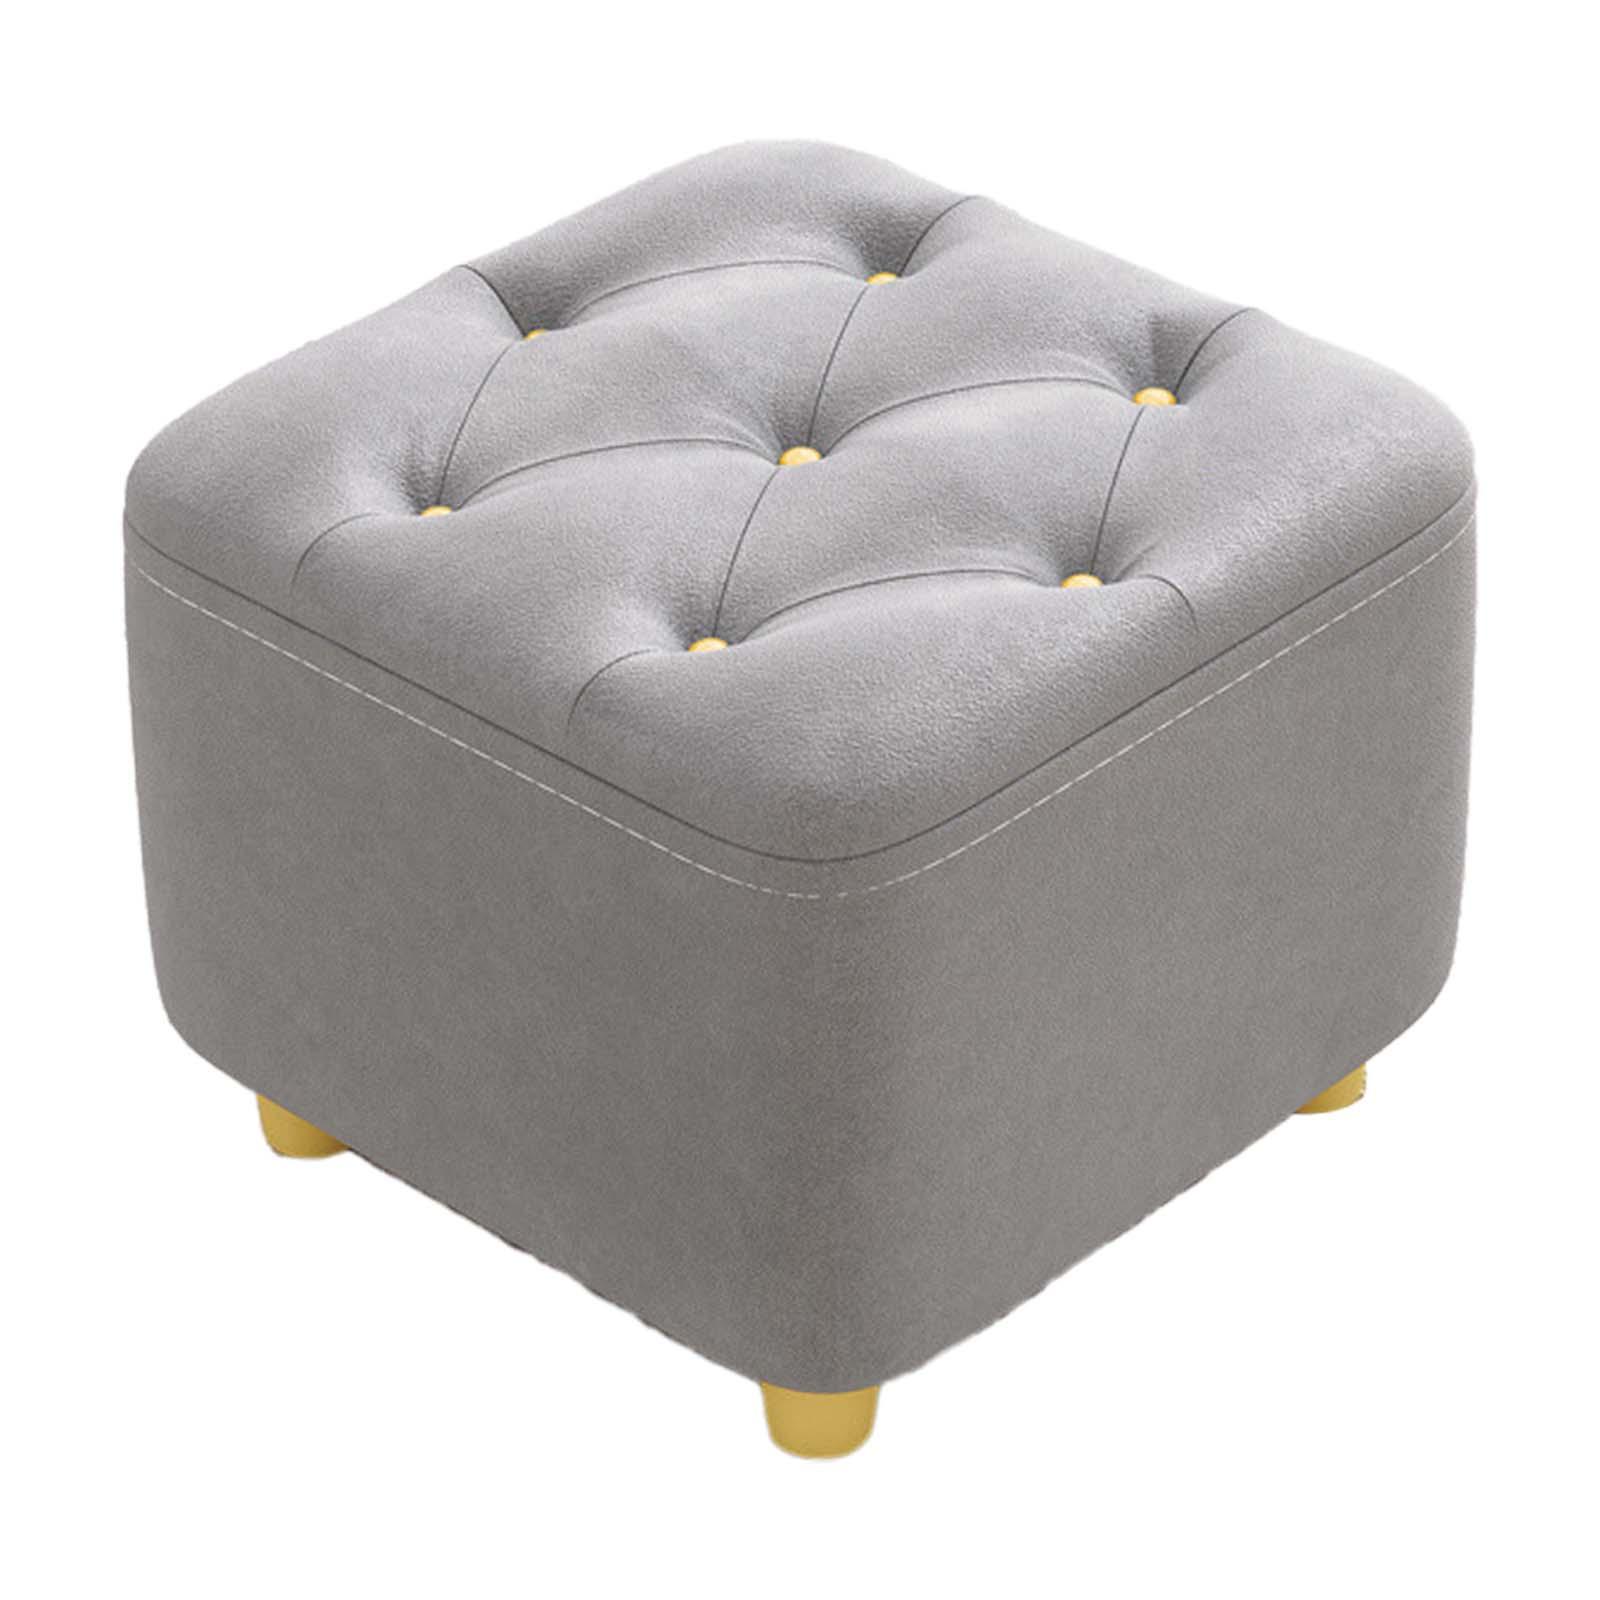 Square Footstool Foot Stool Comfortable Stepstool Creative Ottoman Stool Footrest for Living Room Dressing Room Bedroom Couch gray - image 5 of 8